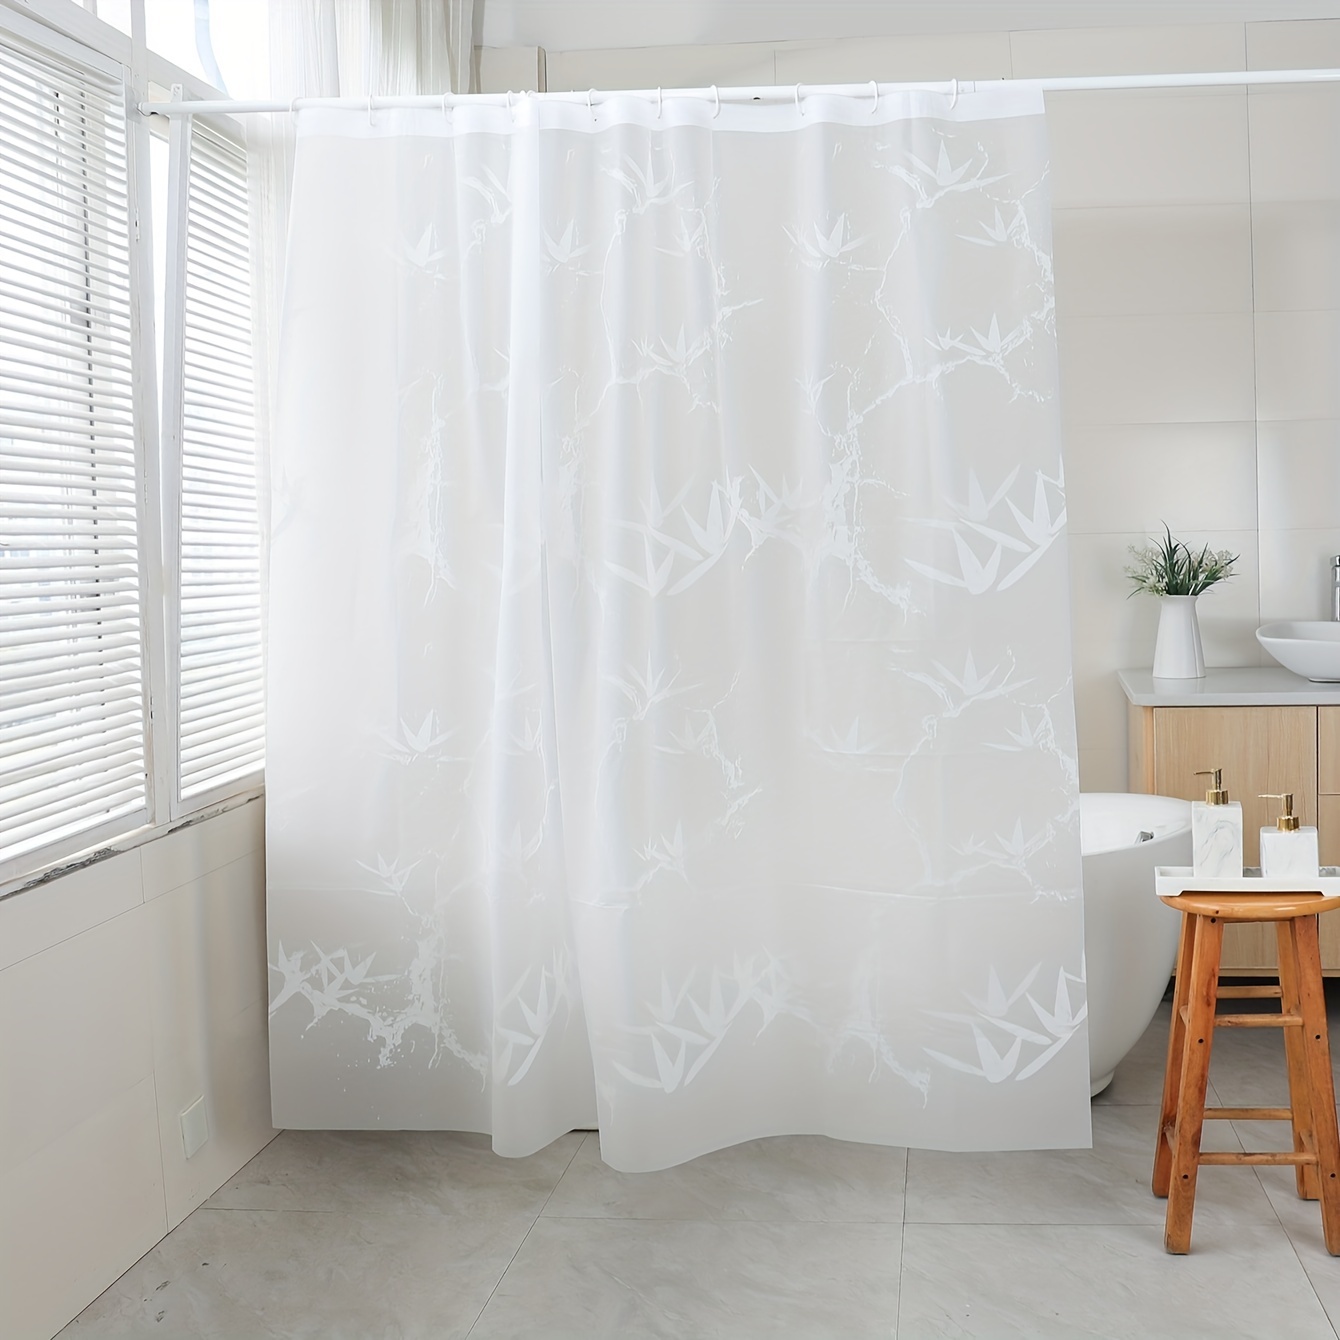 

1pc Waterproof And Mildew-proof White Bamboo Leaf Pattern Shower Curtain With Hooks - Perfect For Bathroom Decor And Windows - 70.87x70.87in